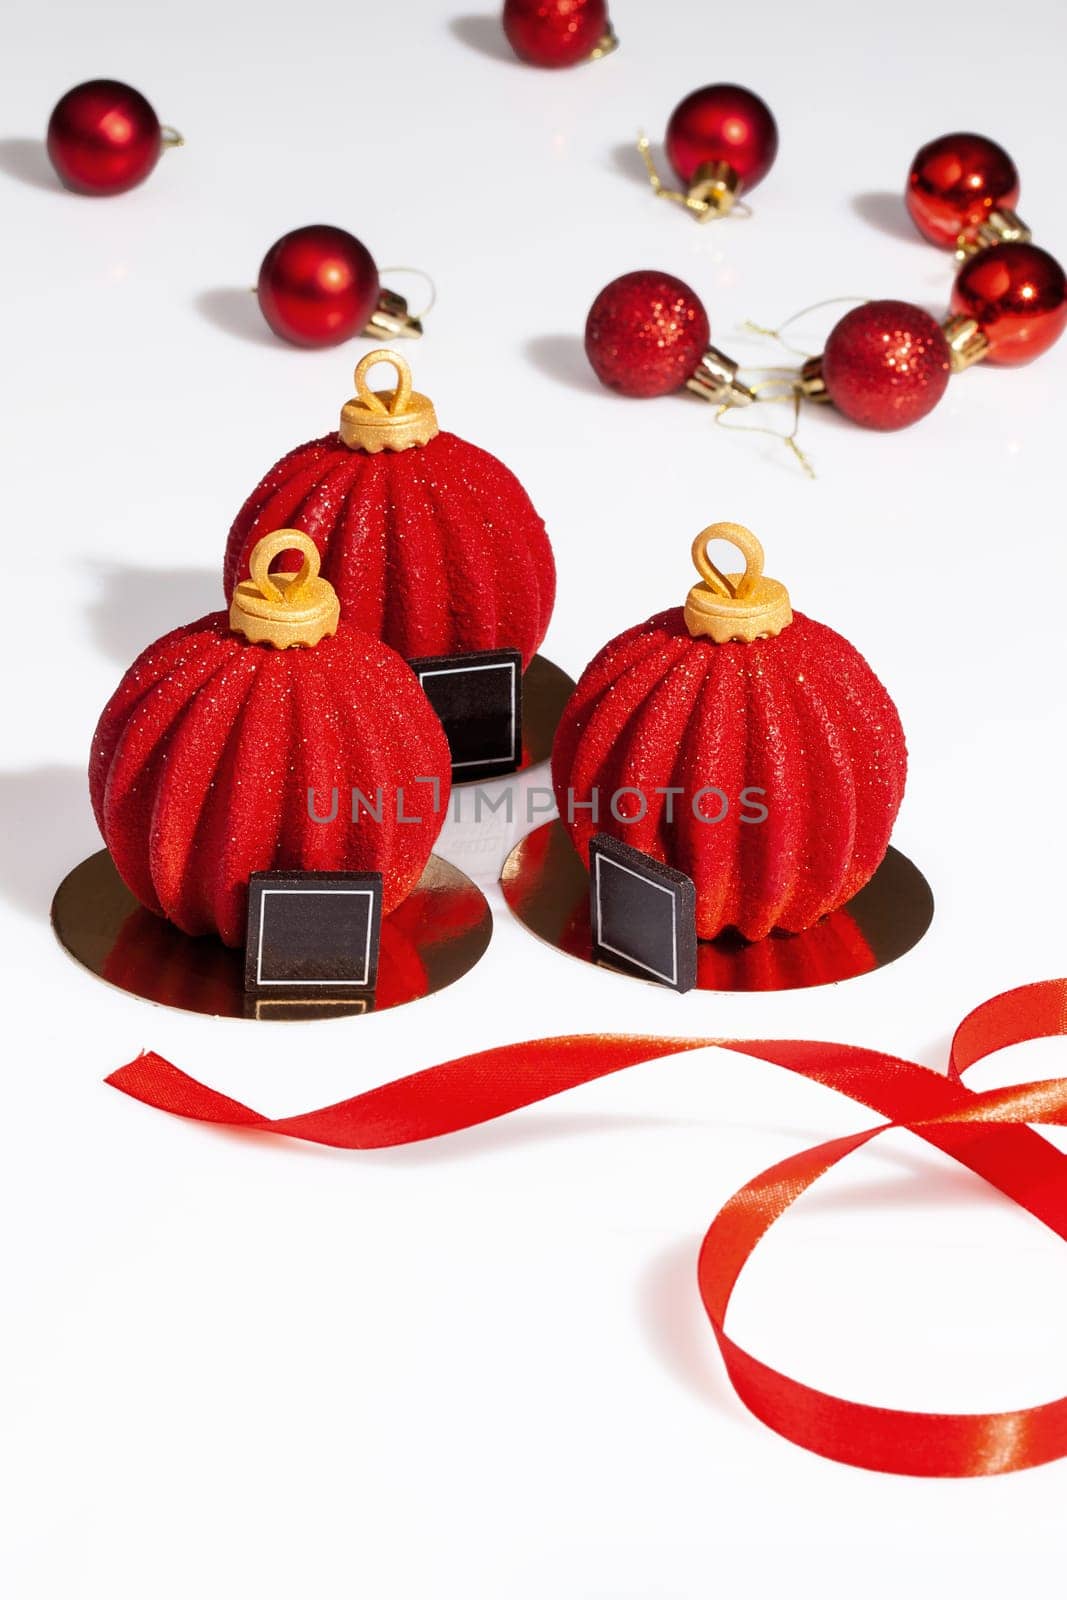 Red and gold pastries in shape of Christmas balls on table by nazarovsergey